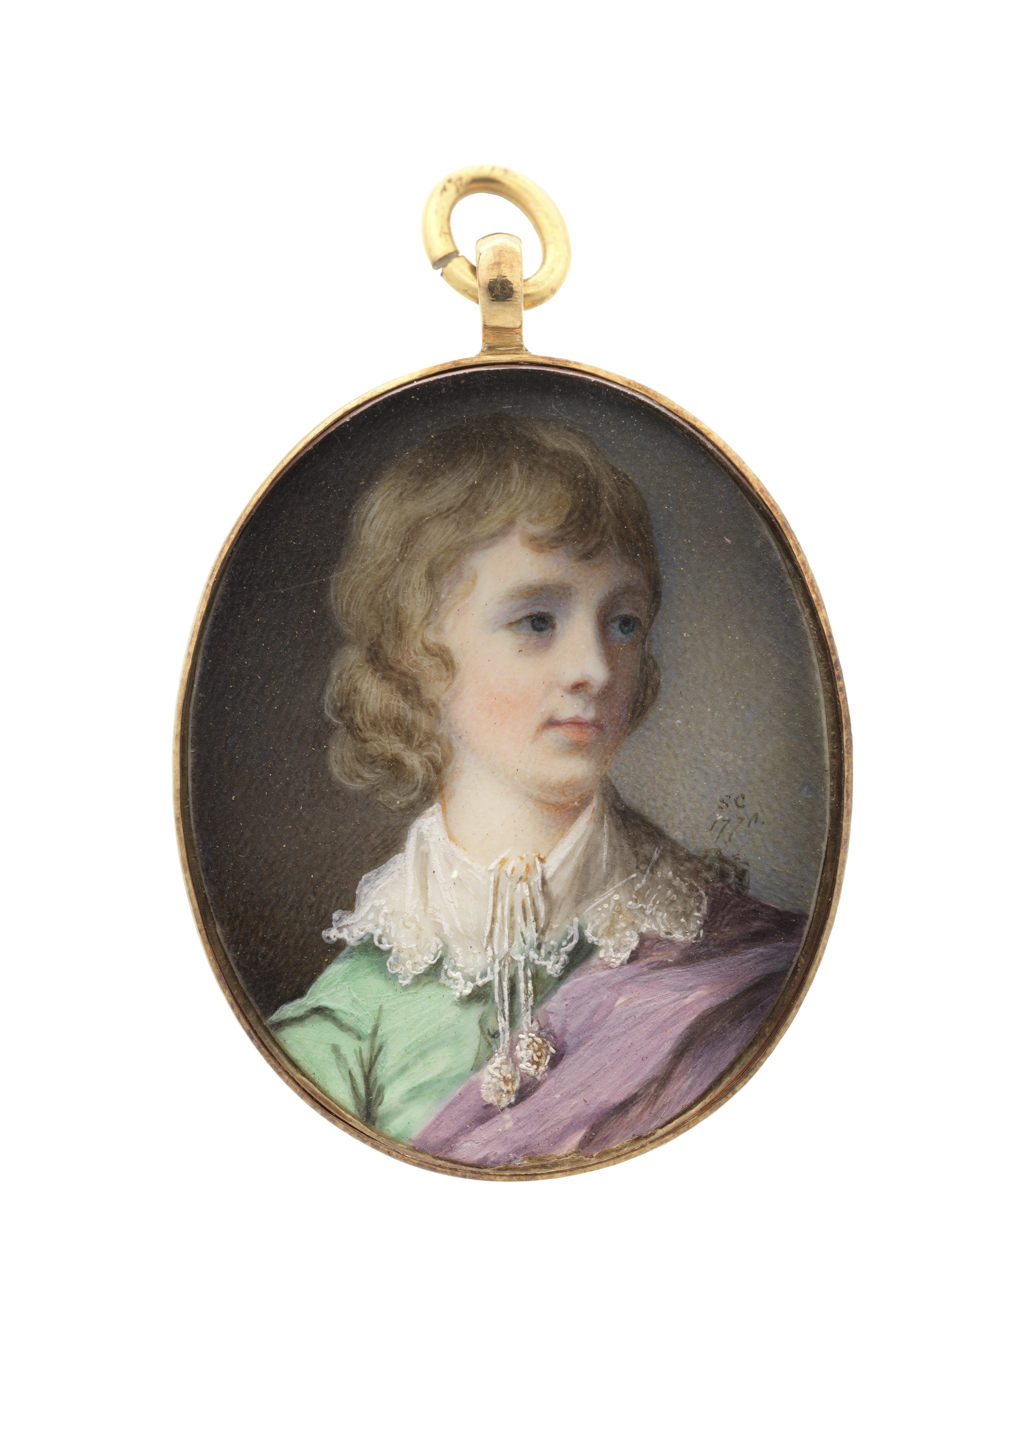 Portrait miniature of a light-skinned boy with natural hair wearing a green coat and lilac sash before a gray-brown background.